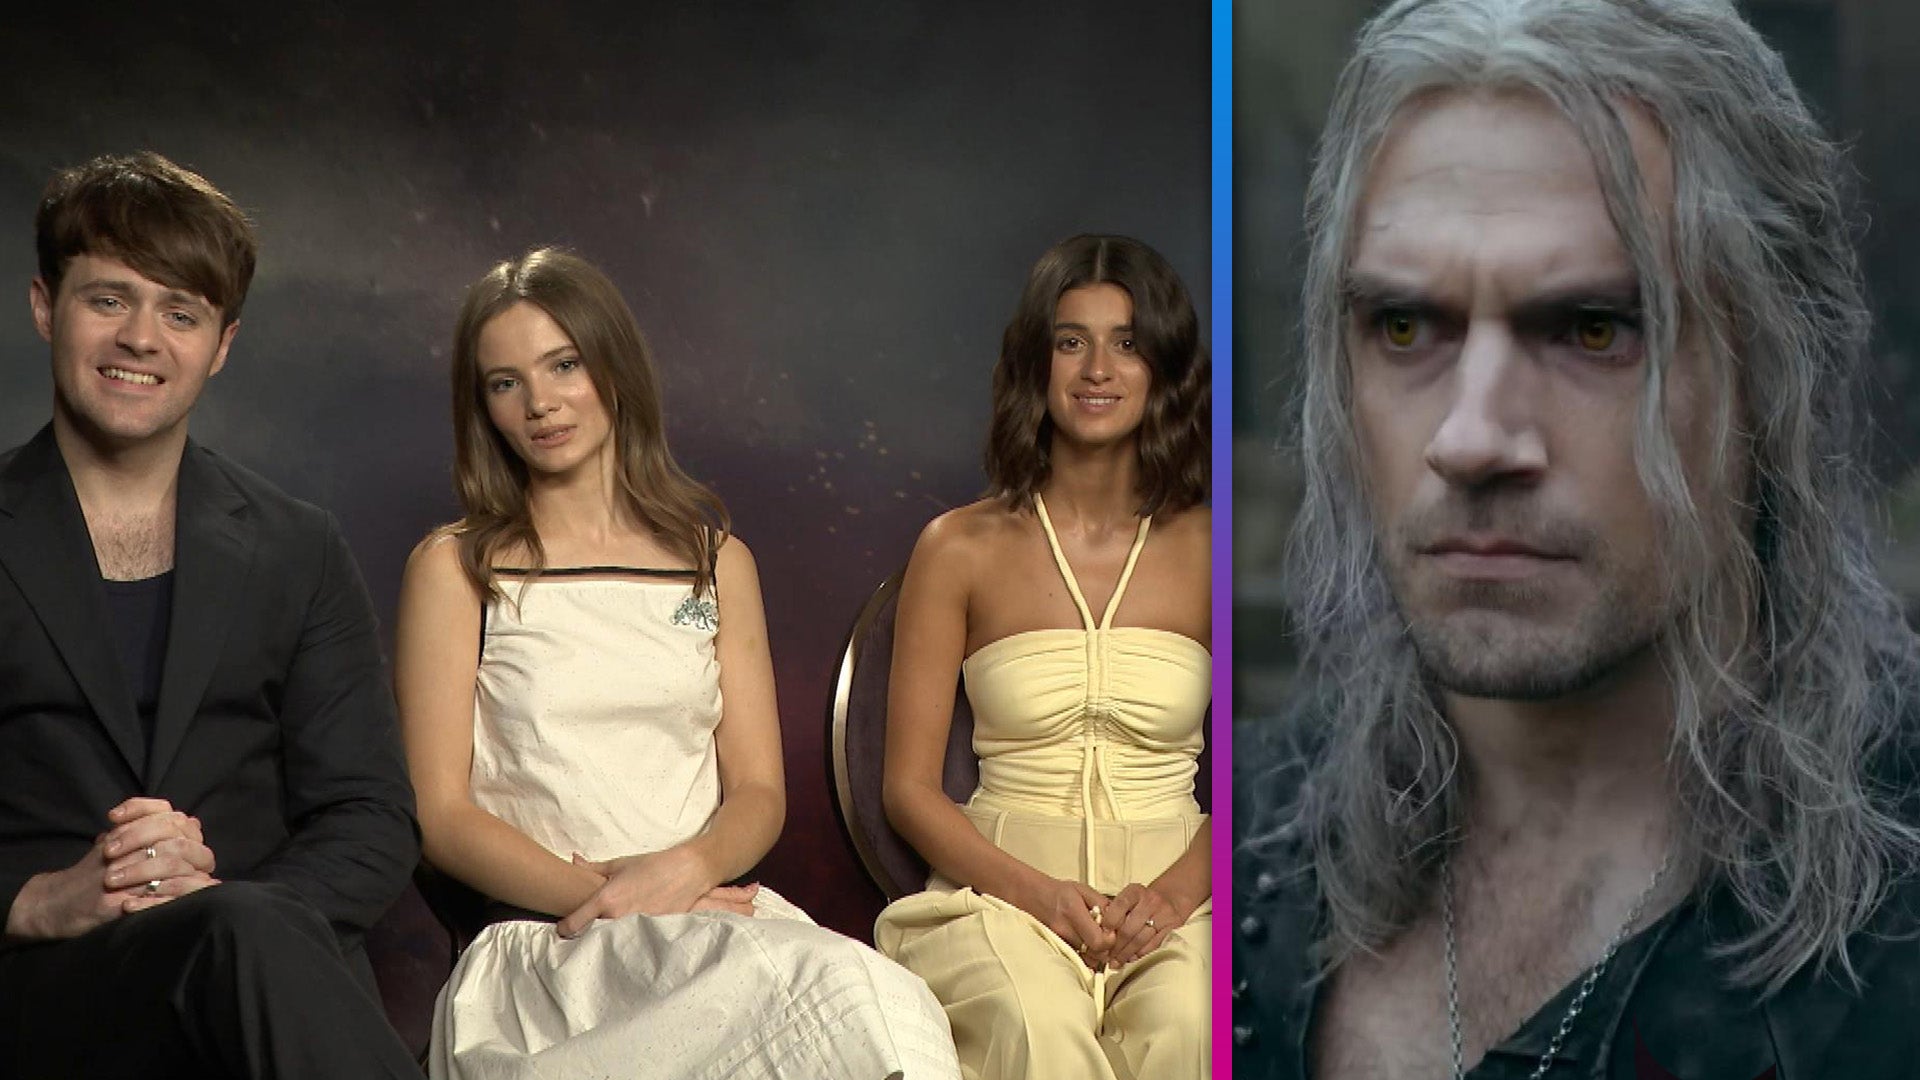 Cast of 'the Witcher' Season 3 and Who They Play